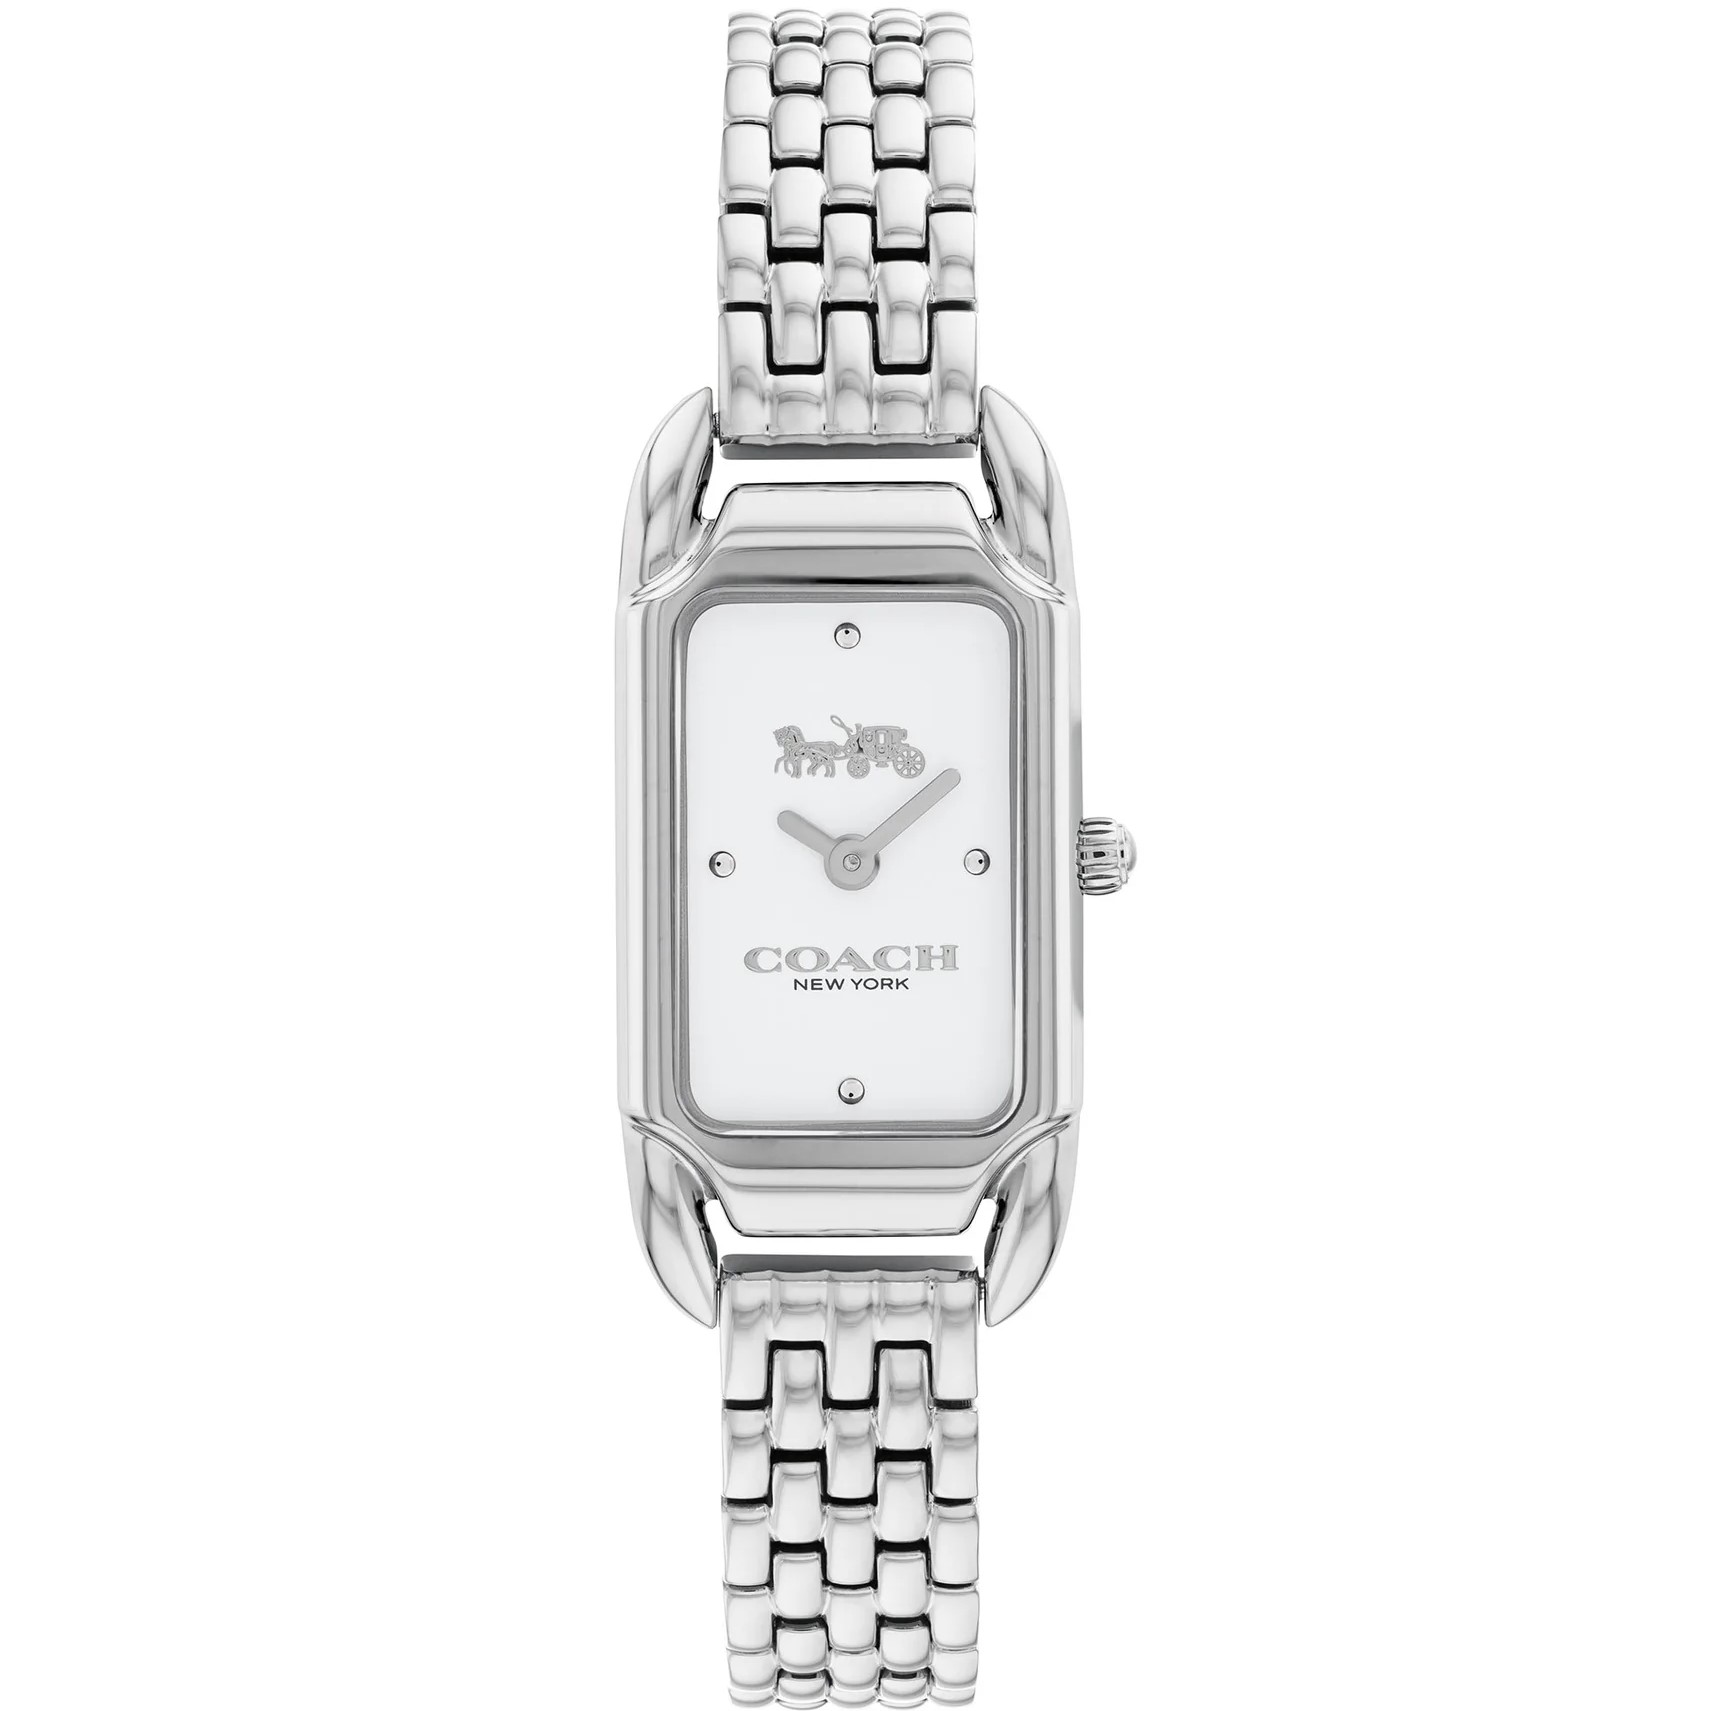 ĐỒNG HỒ NỮ COACH CADIE SILVER STAINLESS STEEL WHITE DIAL WOMENS WATCH 14504035 5